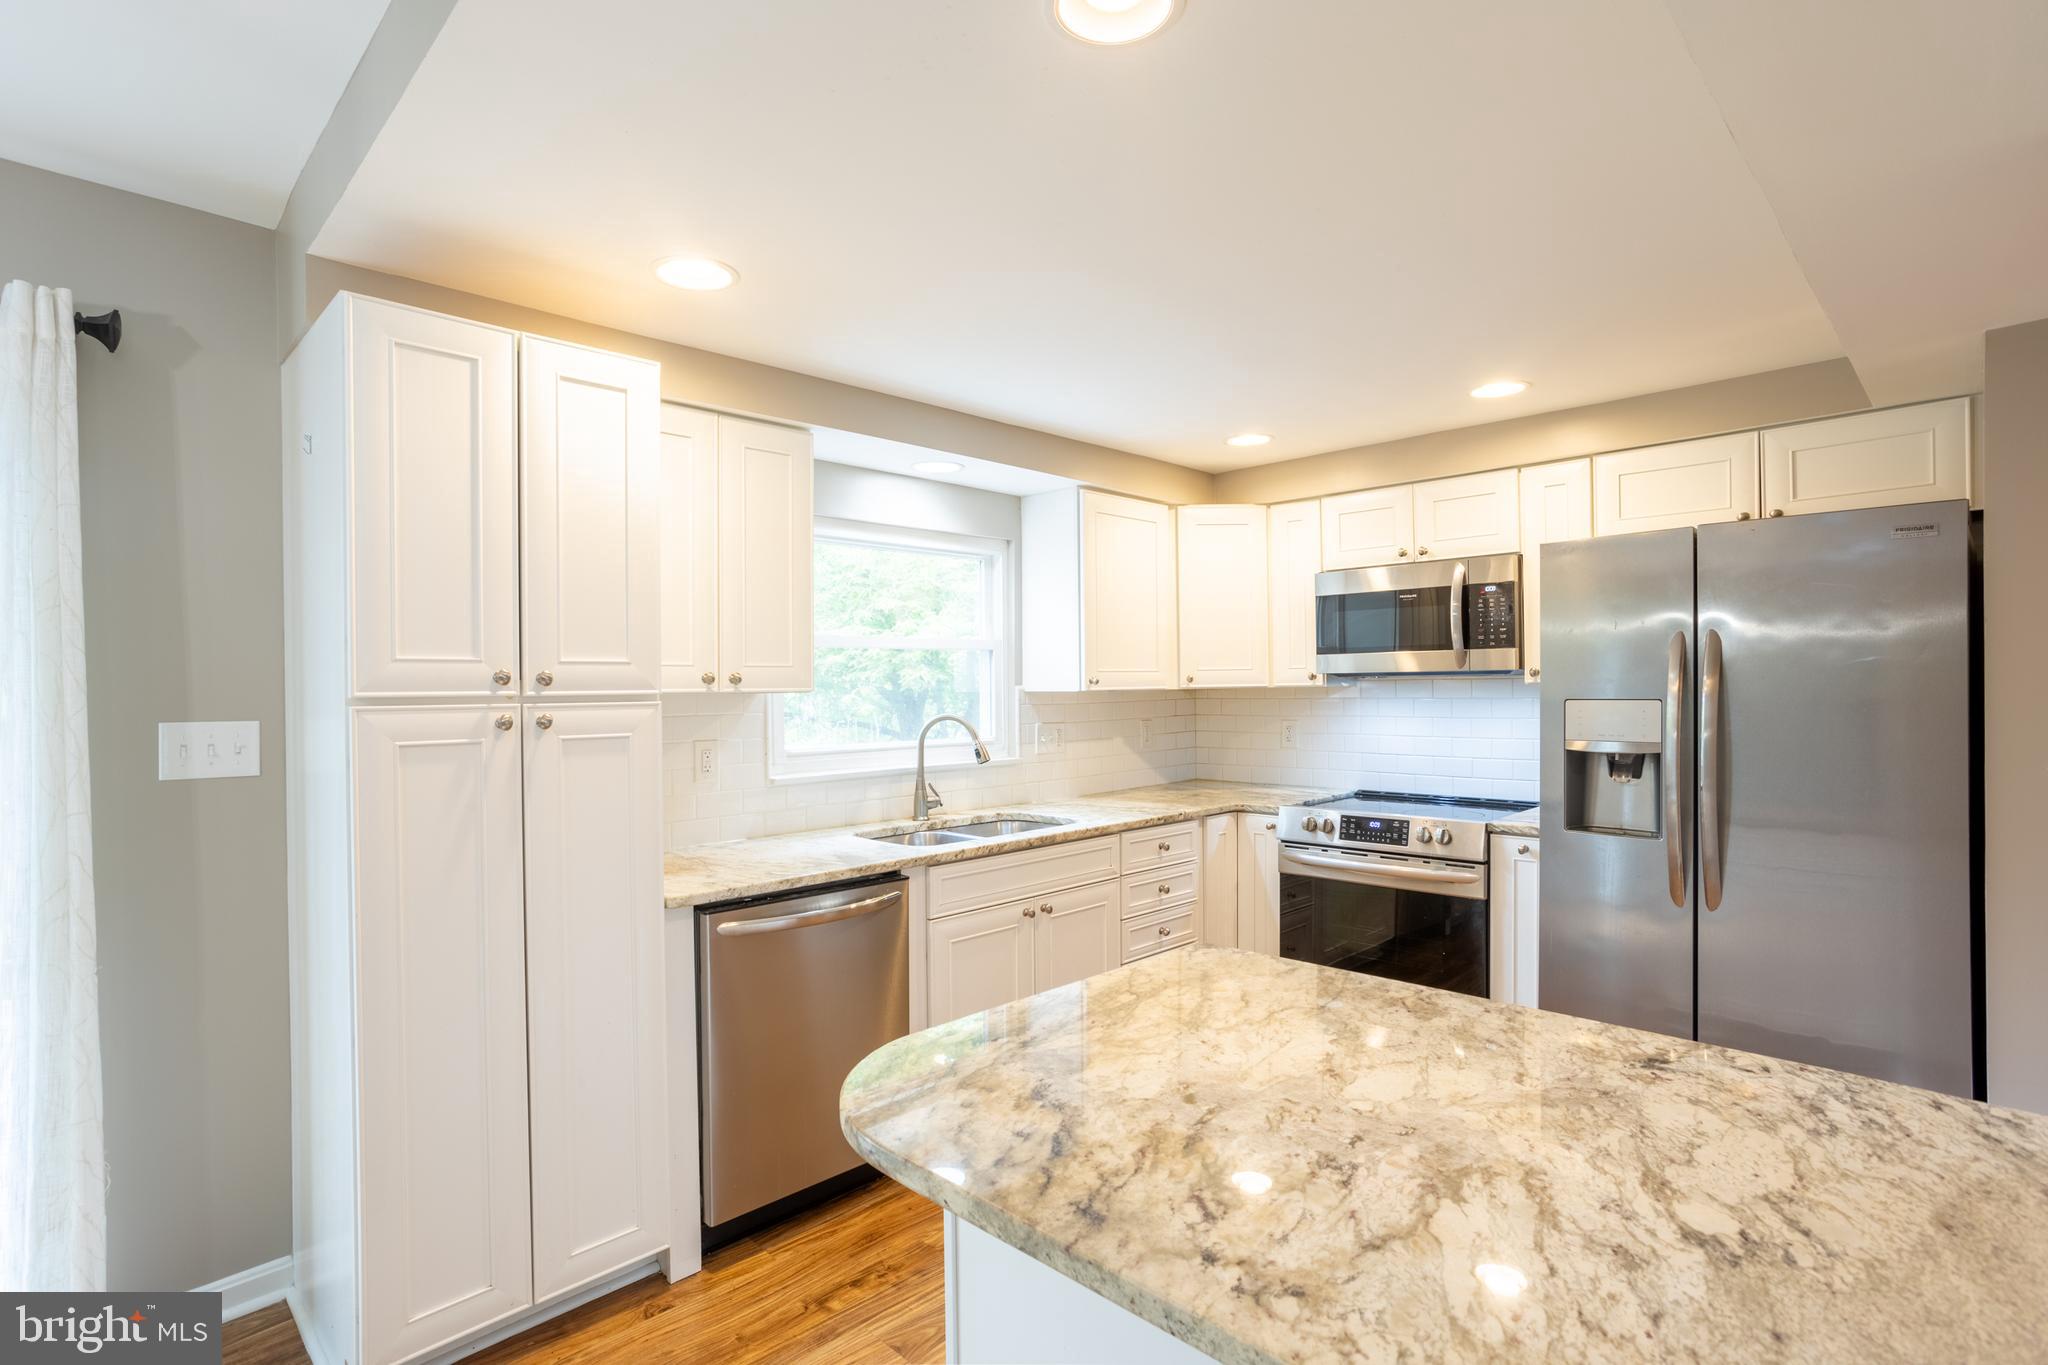 a kitchen with stainless steel appliances granite countertop a refrigerator sink and stove